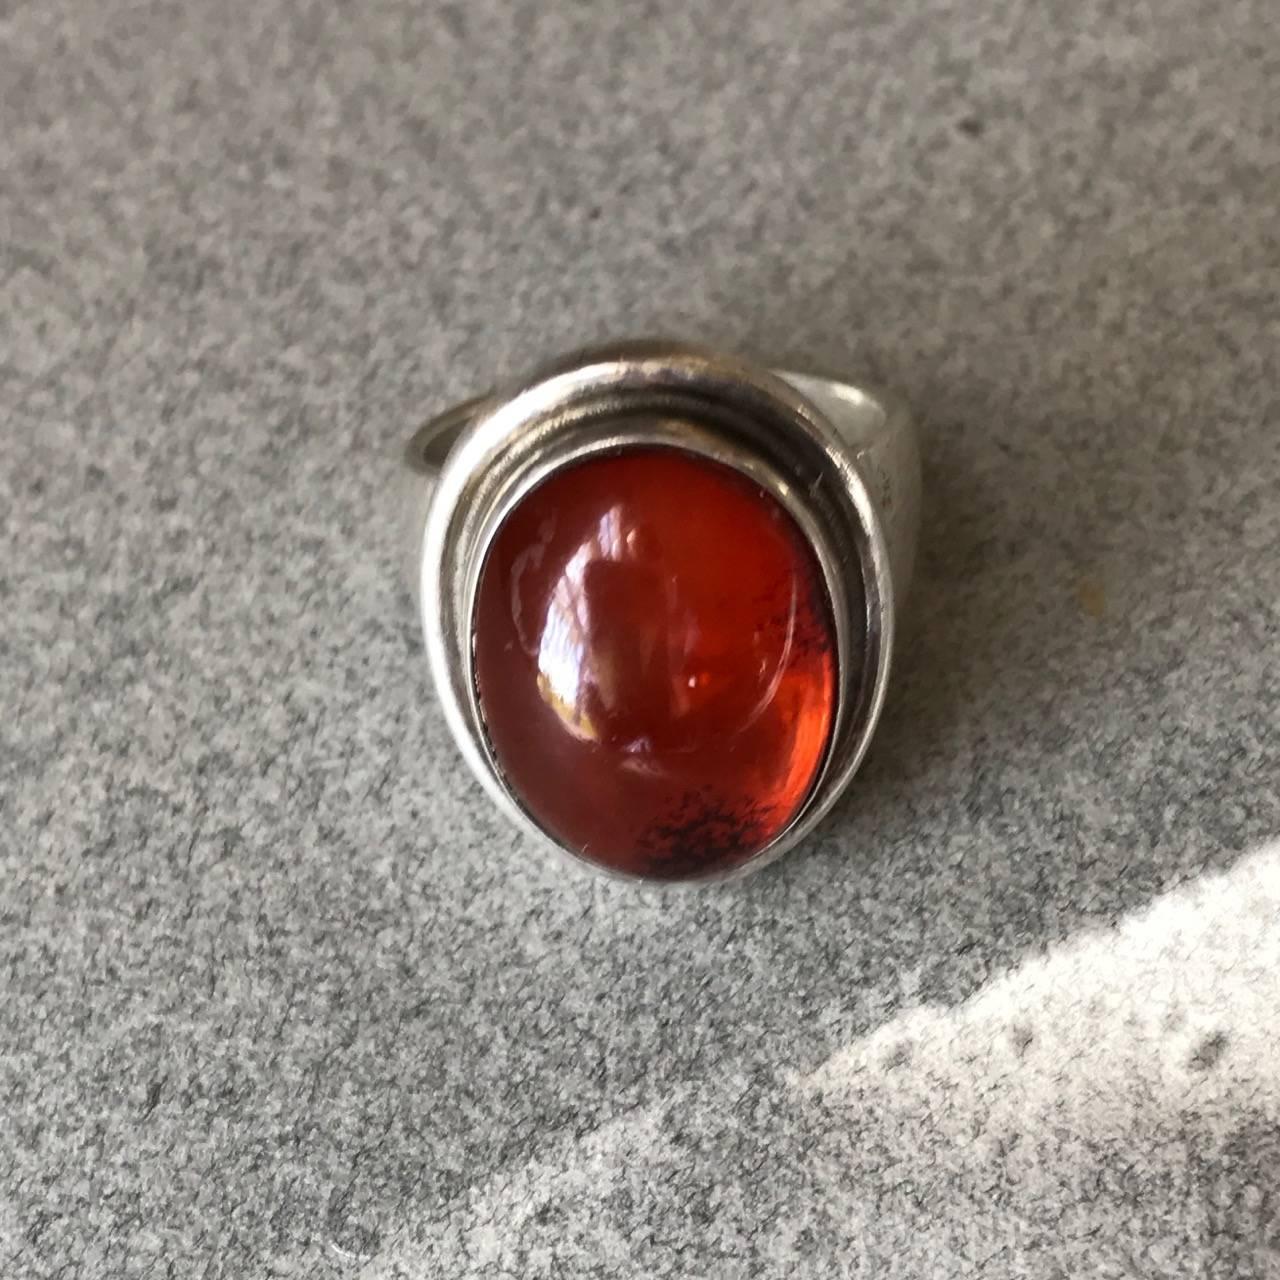 Georg Jensen Sterling Silver Amber Ring by Harald Nielsen, No. 46A

A classic sterling silver ring featuring a bright translucent amber cabochon.

Post 1945 Hallmarks.  Size 7.

Can be resized up or down. Very good condition.

Complimentary gift box